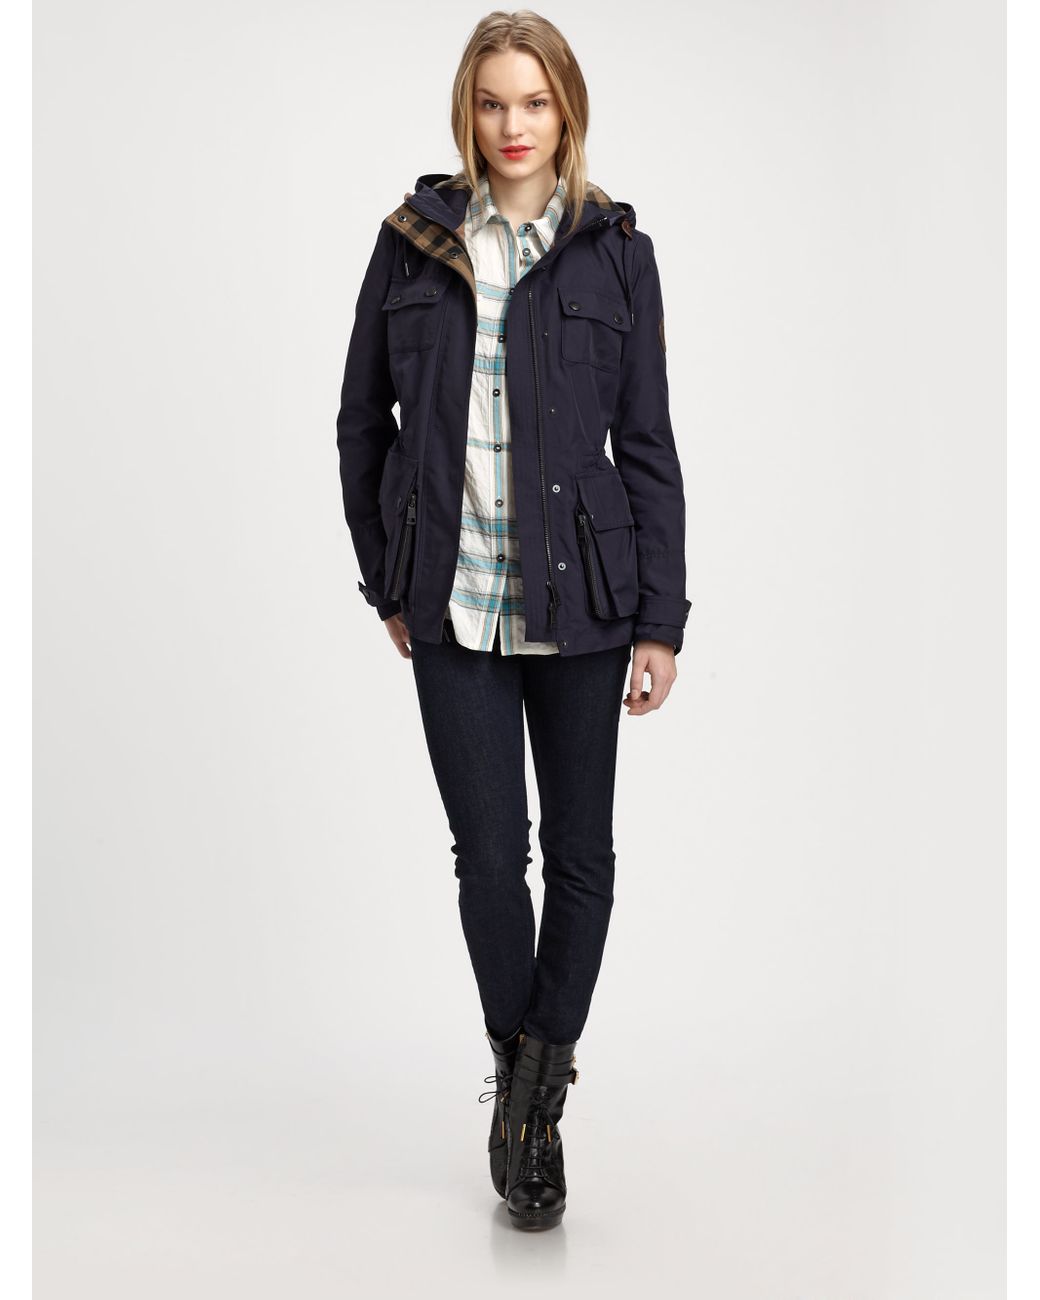 Burberry Brit Hooded Utility Jacket in Blue | Lyst